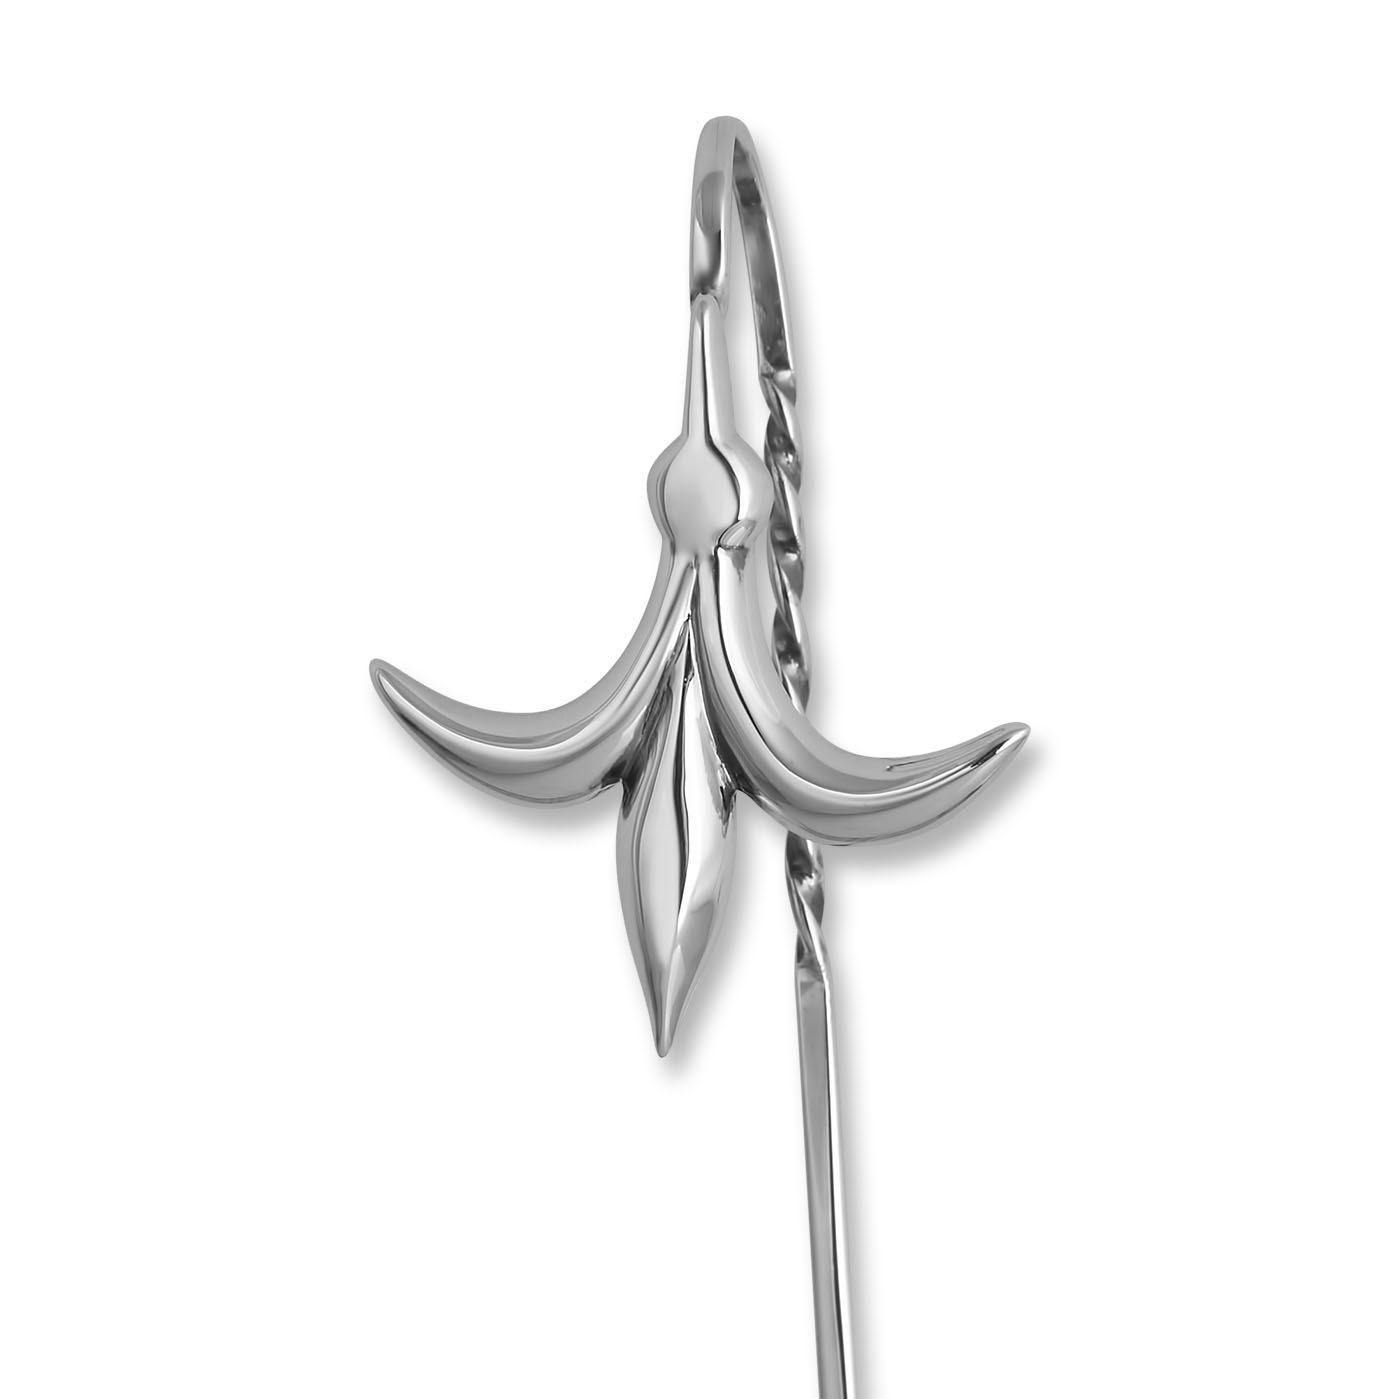  Lily Flower Sterling Silver Bookmark - 1